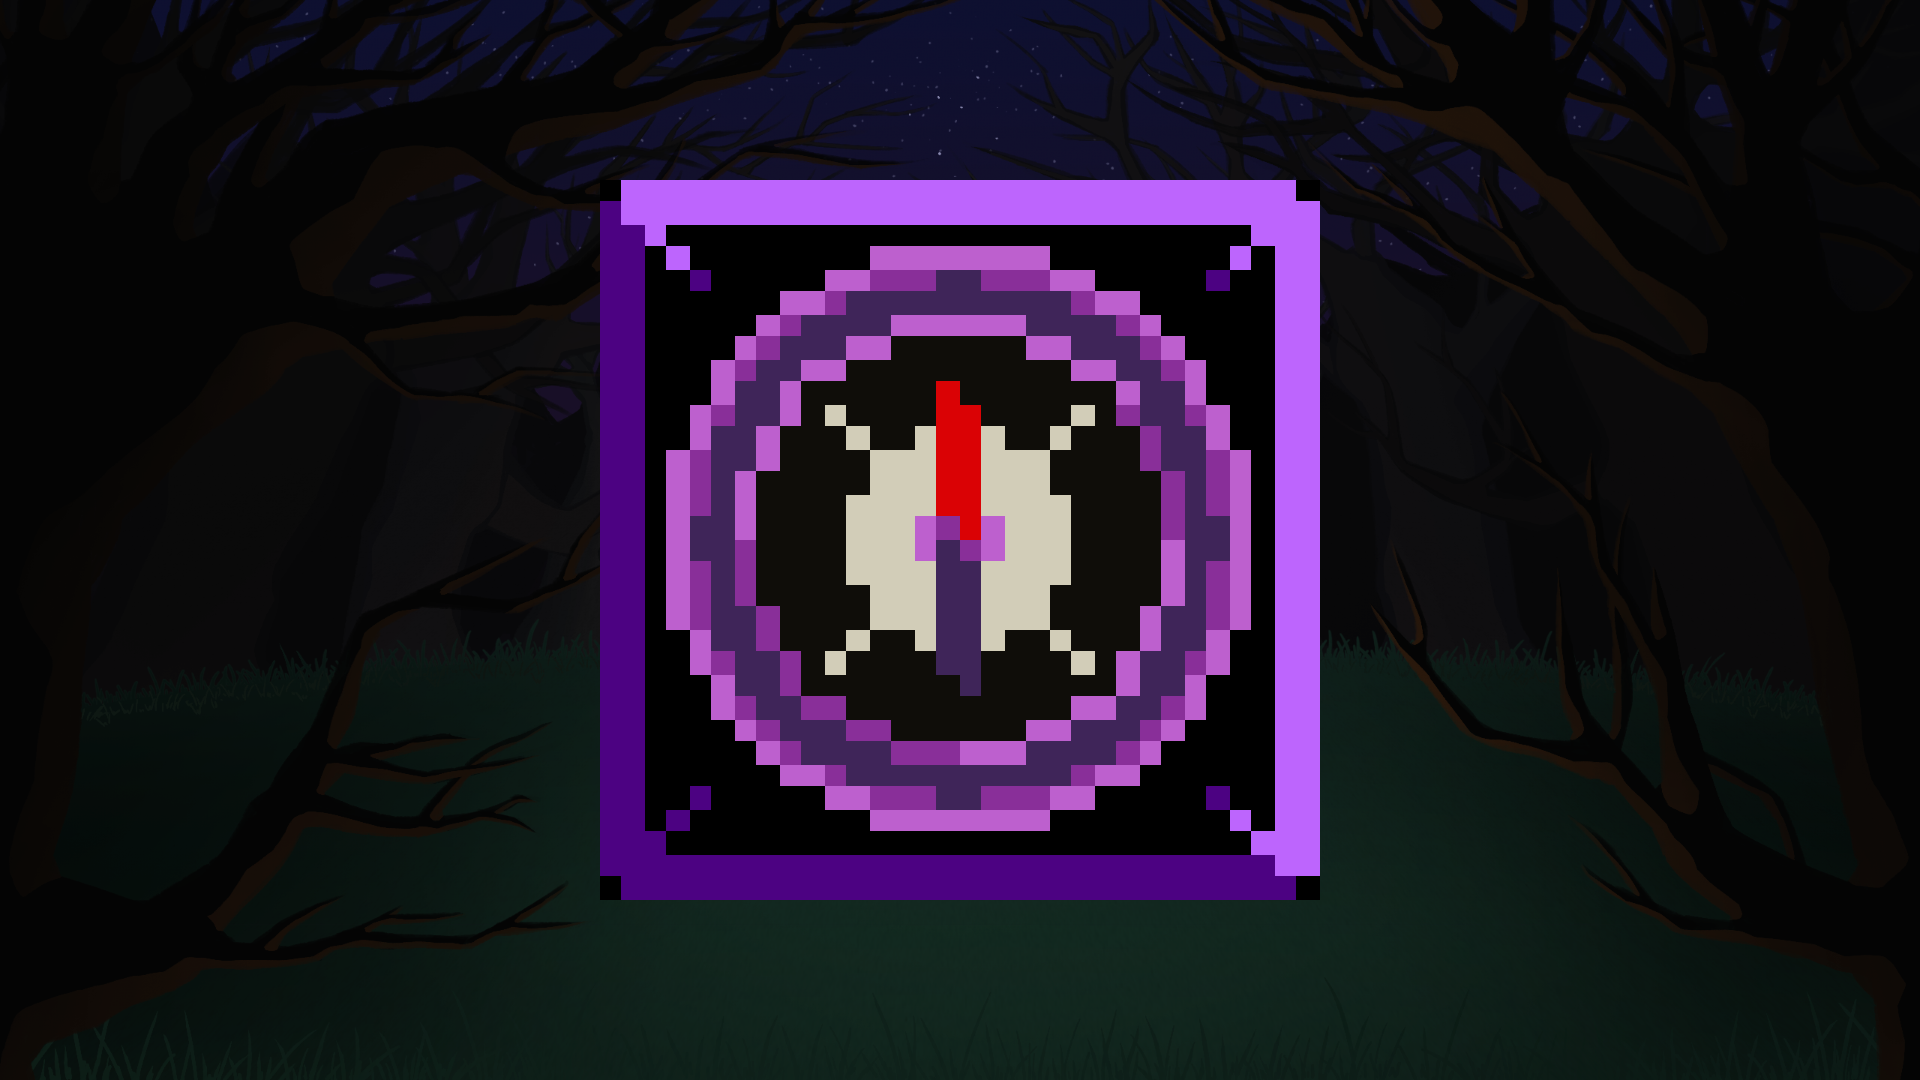 Icon for Compass